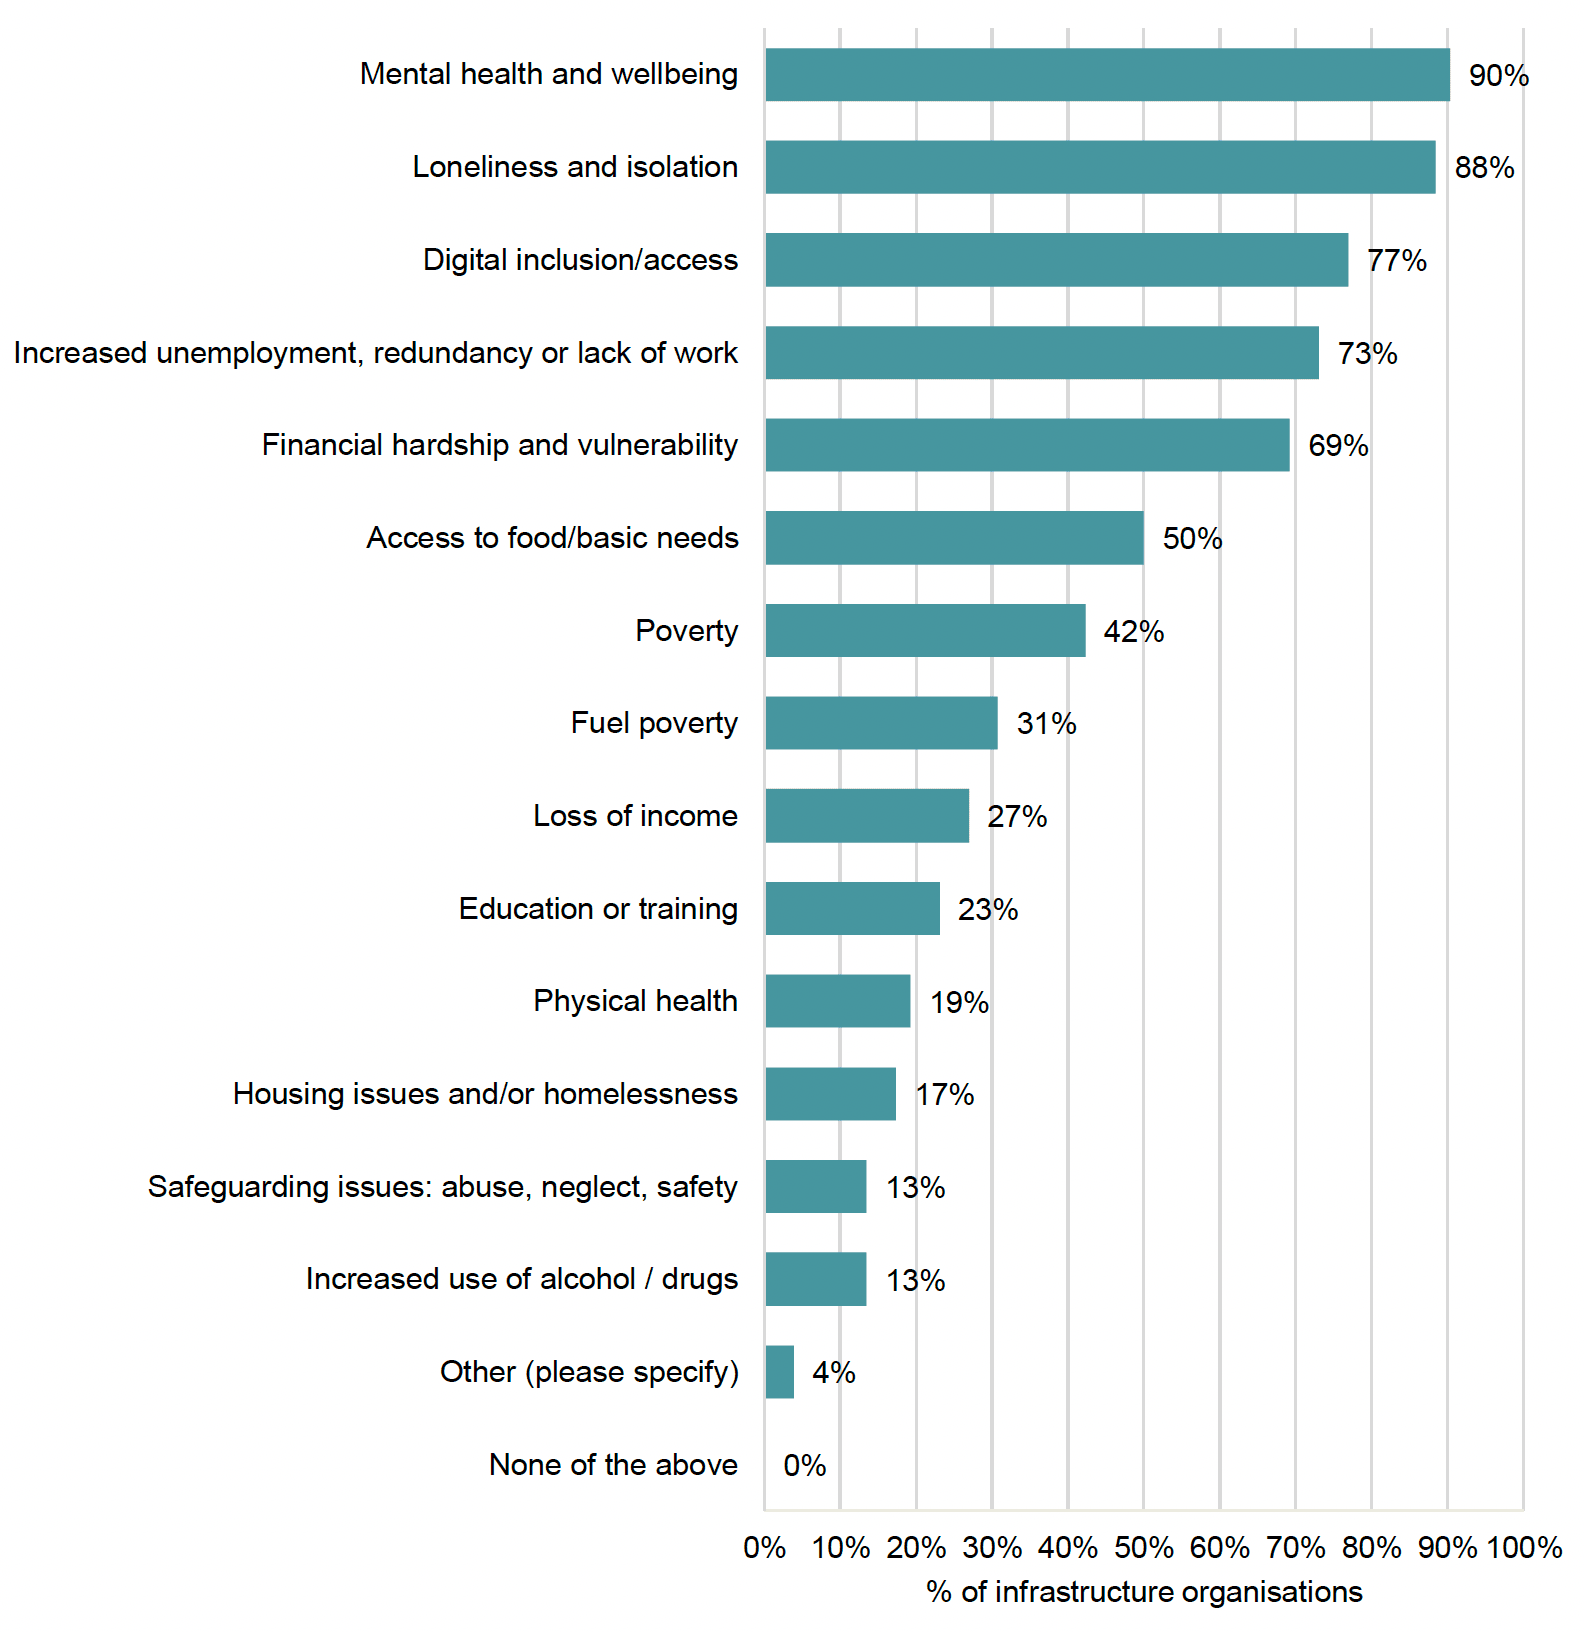 Chart showing infrastructure organisation views on the most important emerging needs over the next 12 months